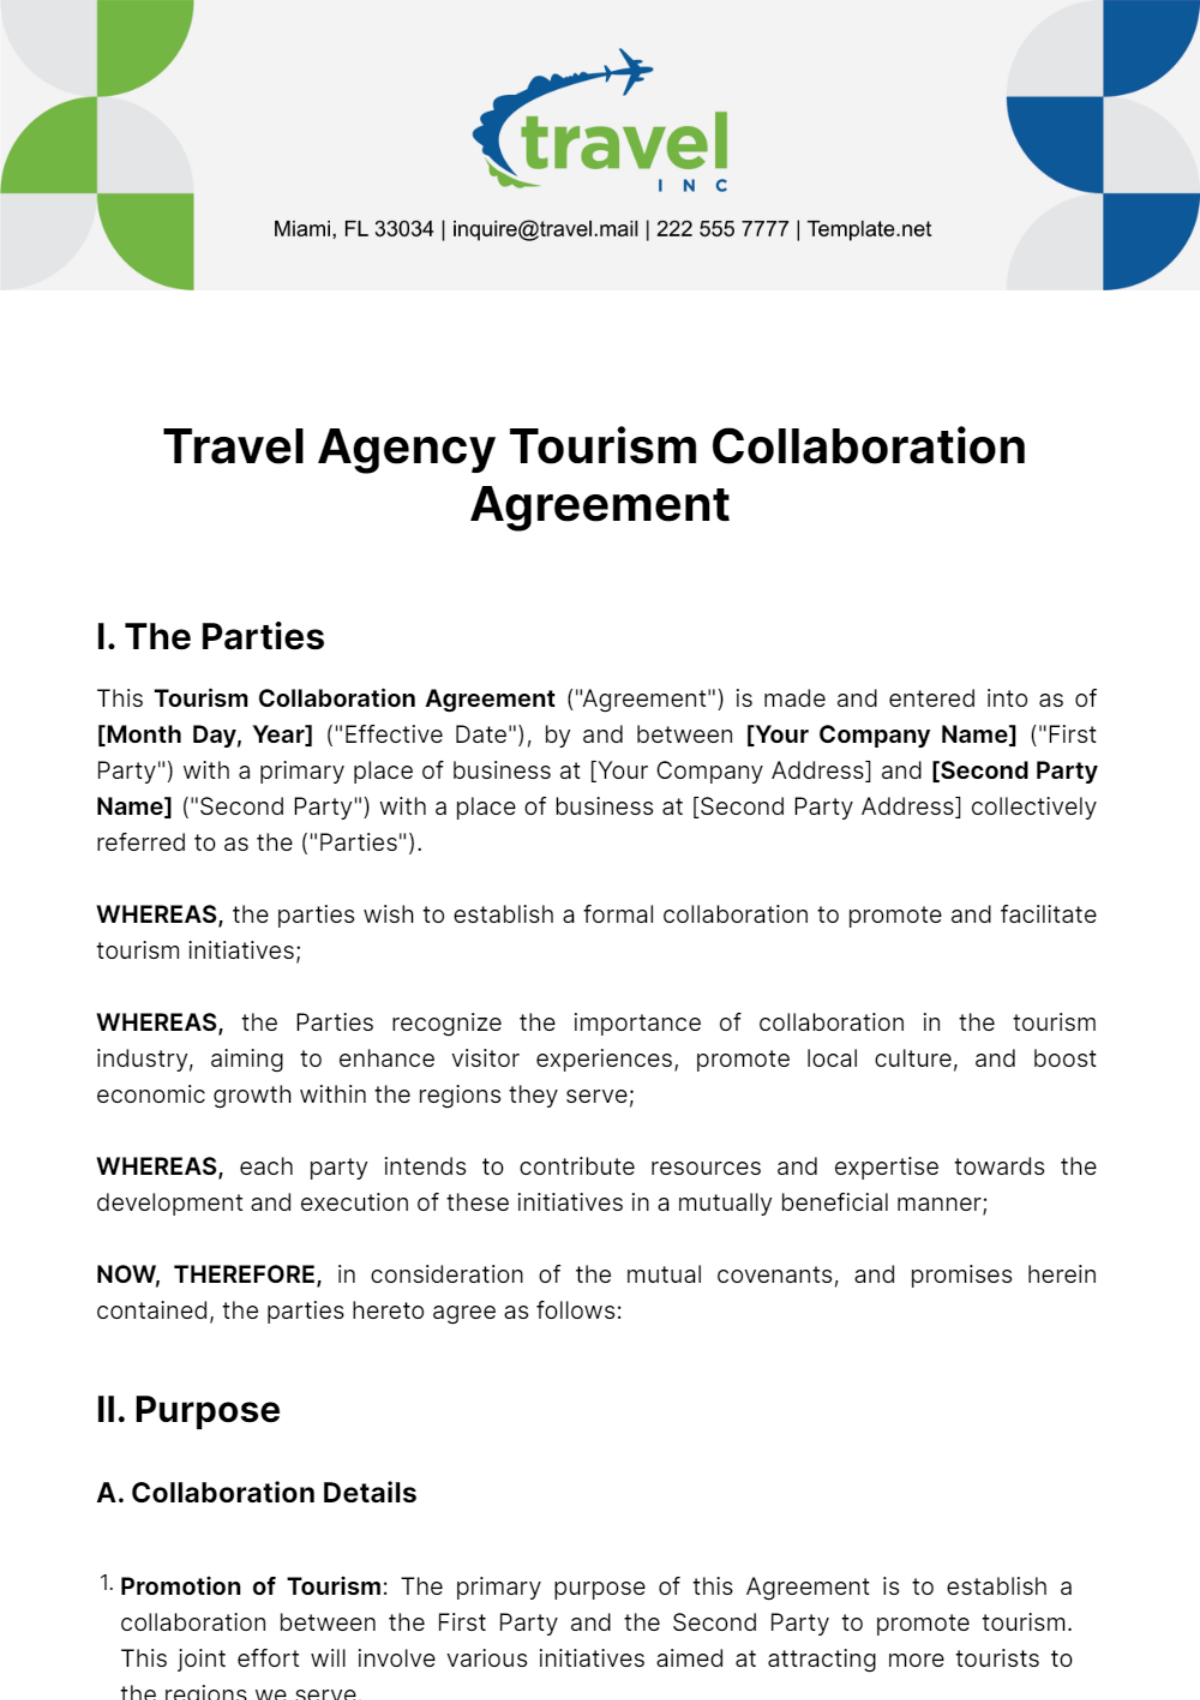 Free Travel Agency Tourism Collaboration Agreement Template